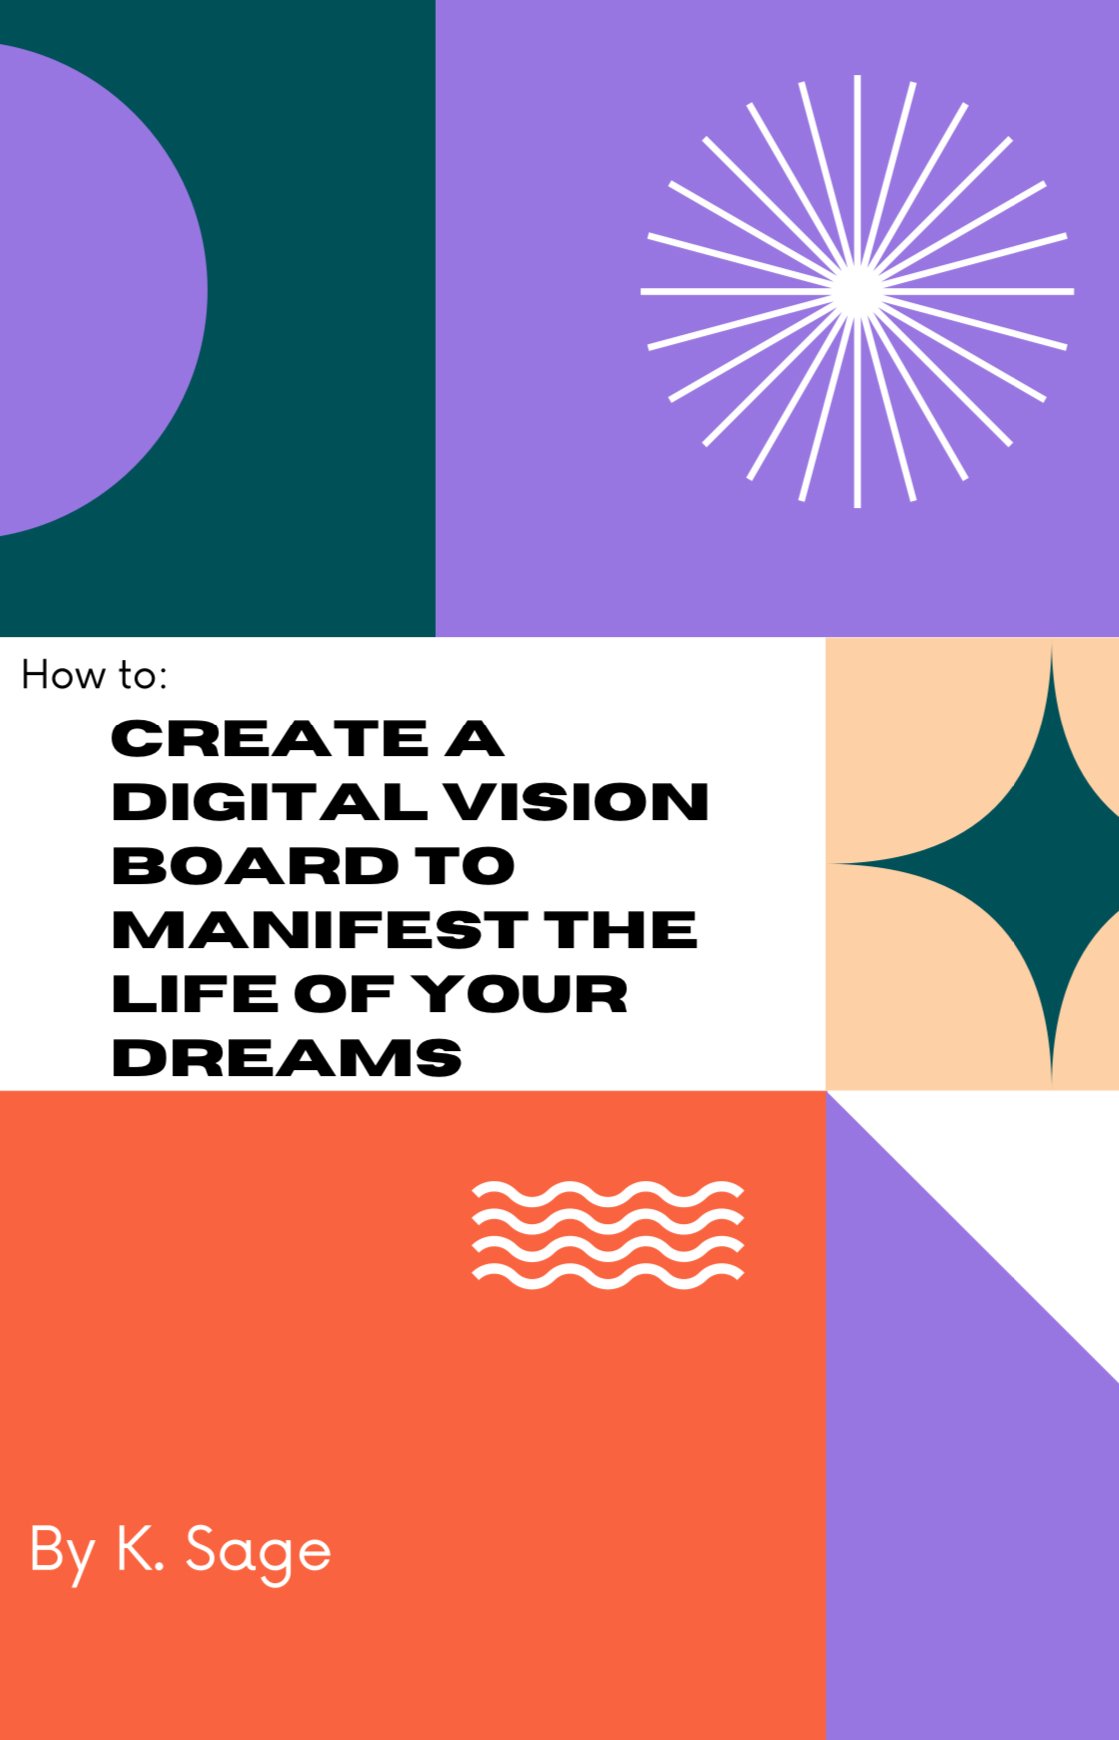 How to Make a Vision Board to Manifest the Life of Your Dreams